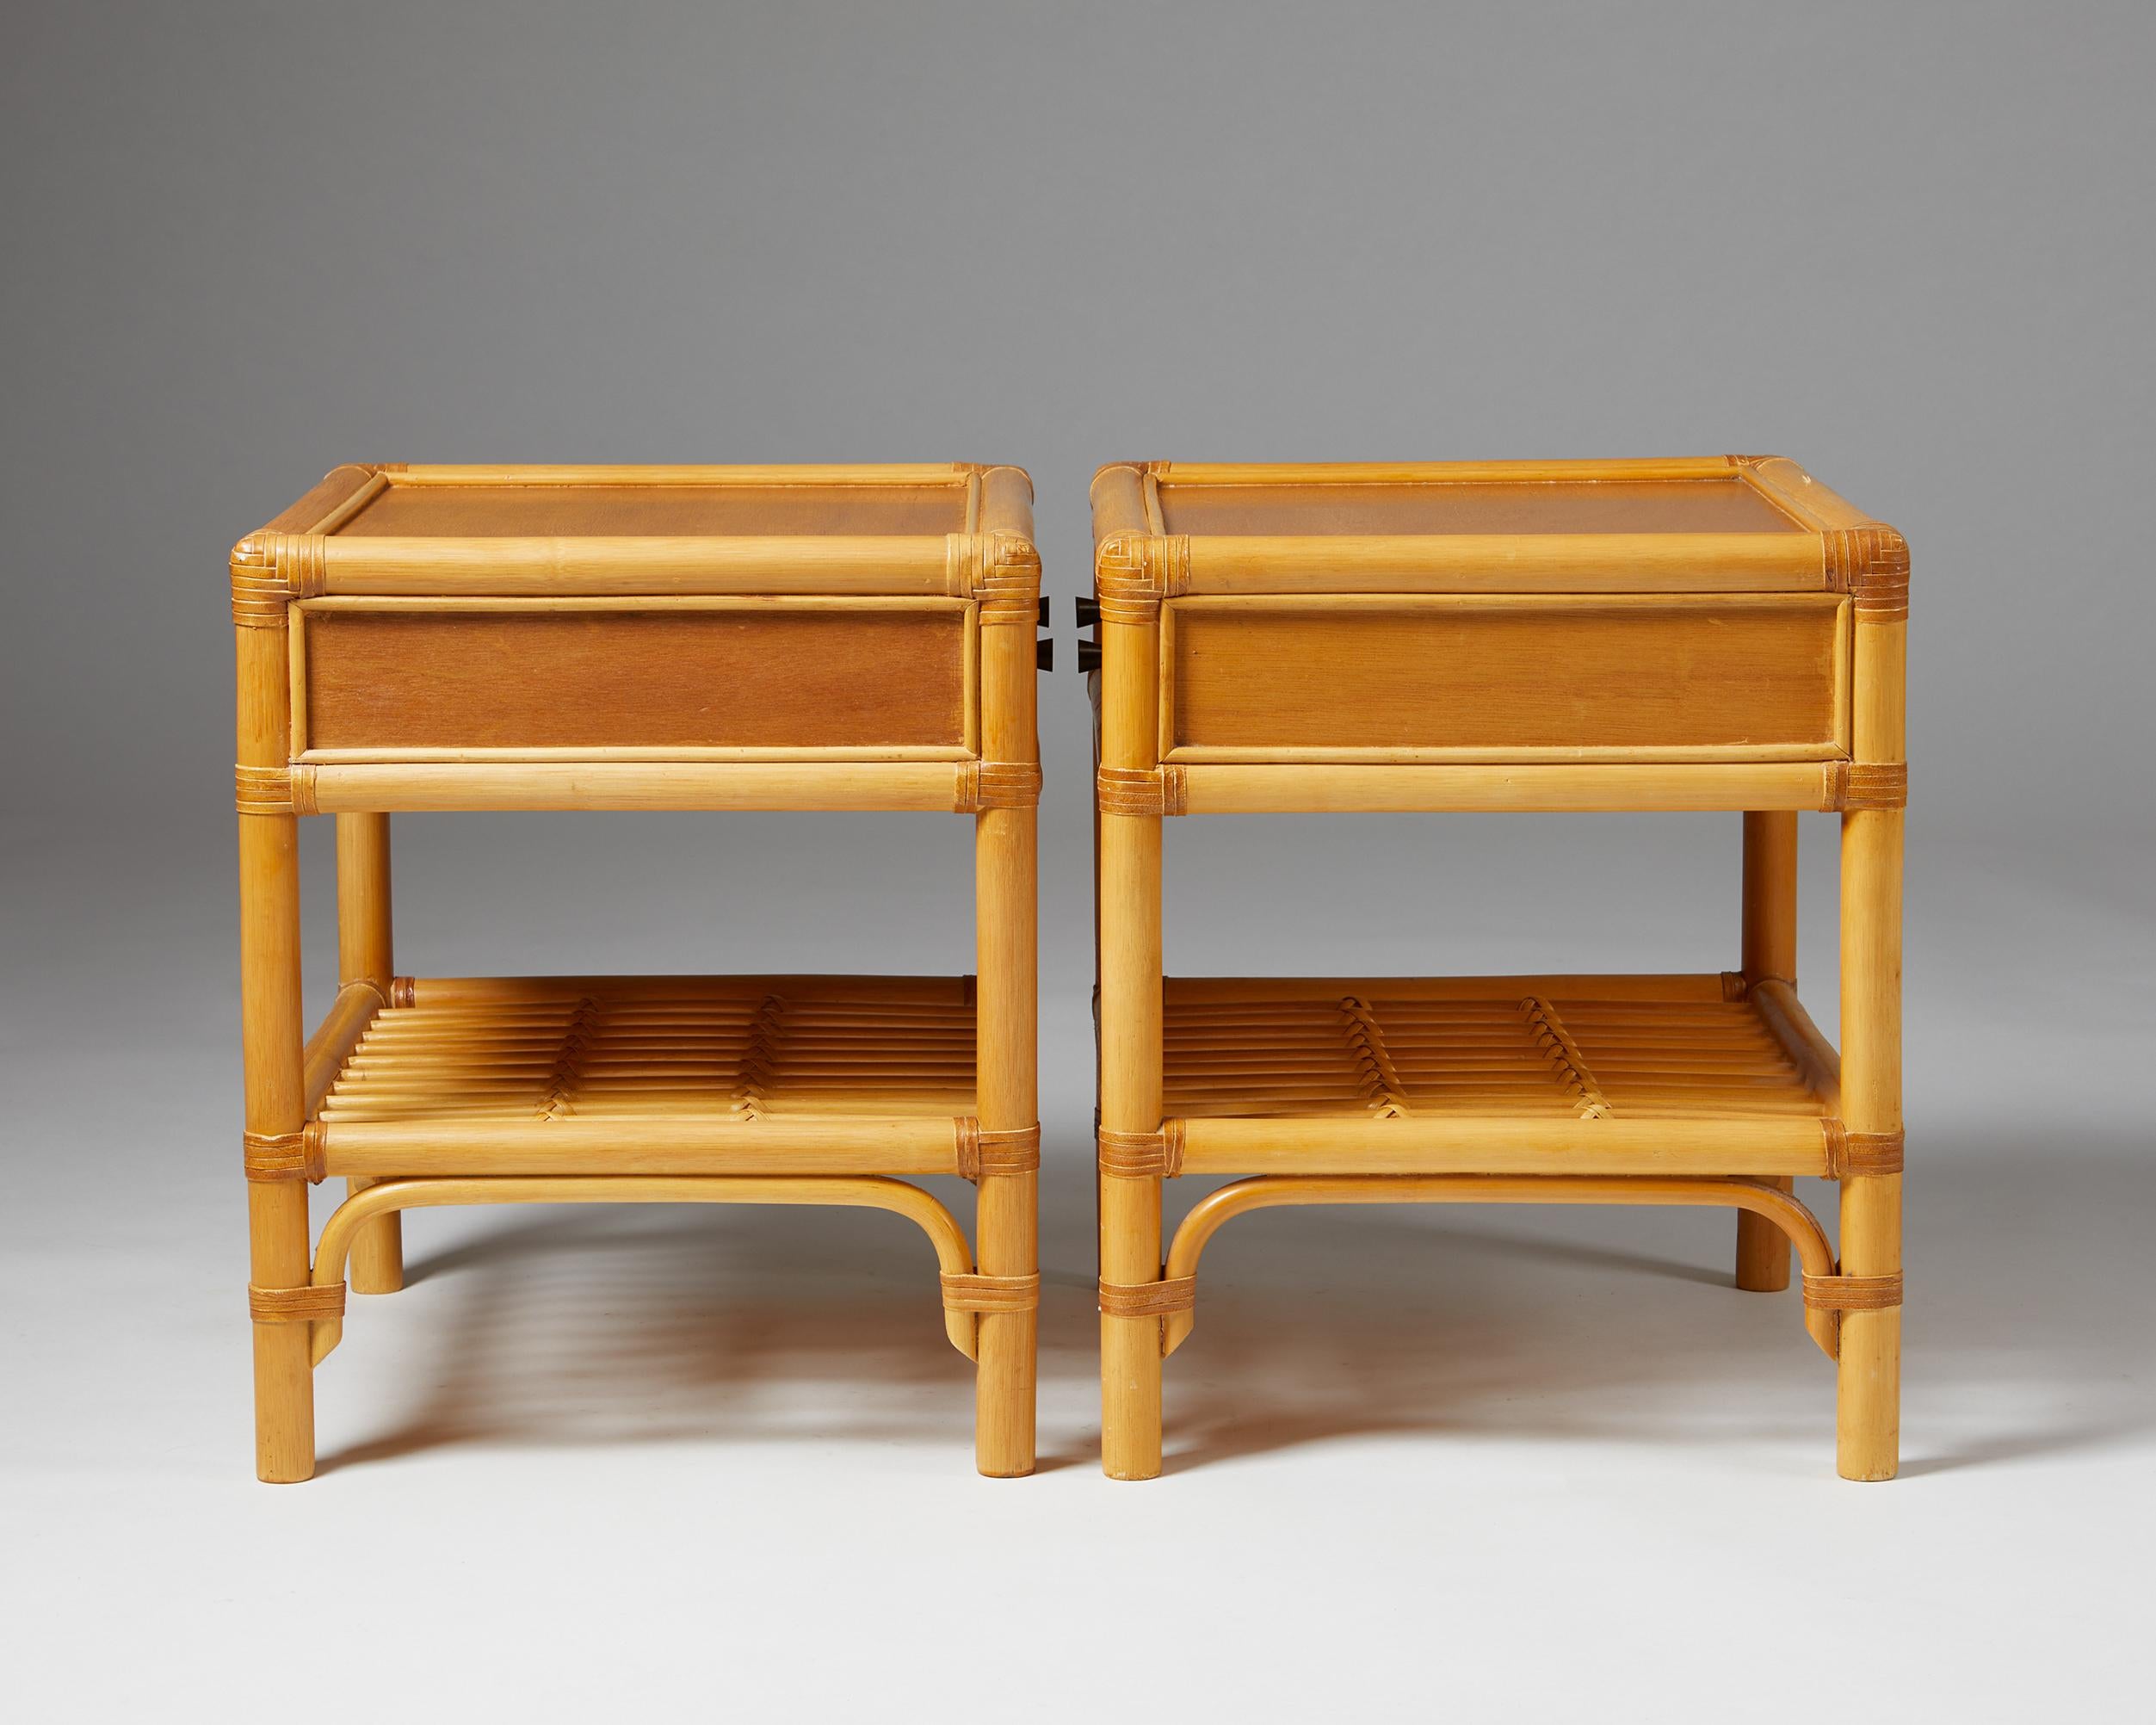 Pair of Bedside Tables, Anonymous for DUX, Sweden, 1960s In Good Condition For Sale In Stockholm, SE